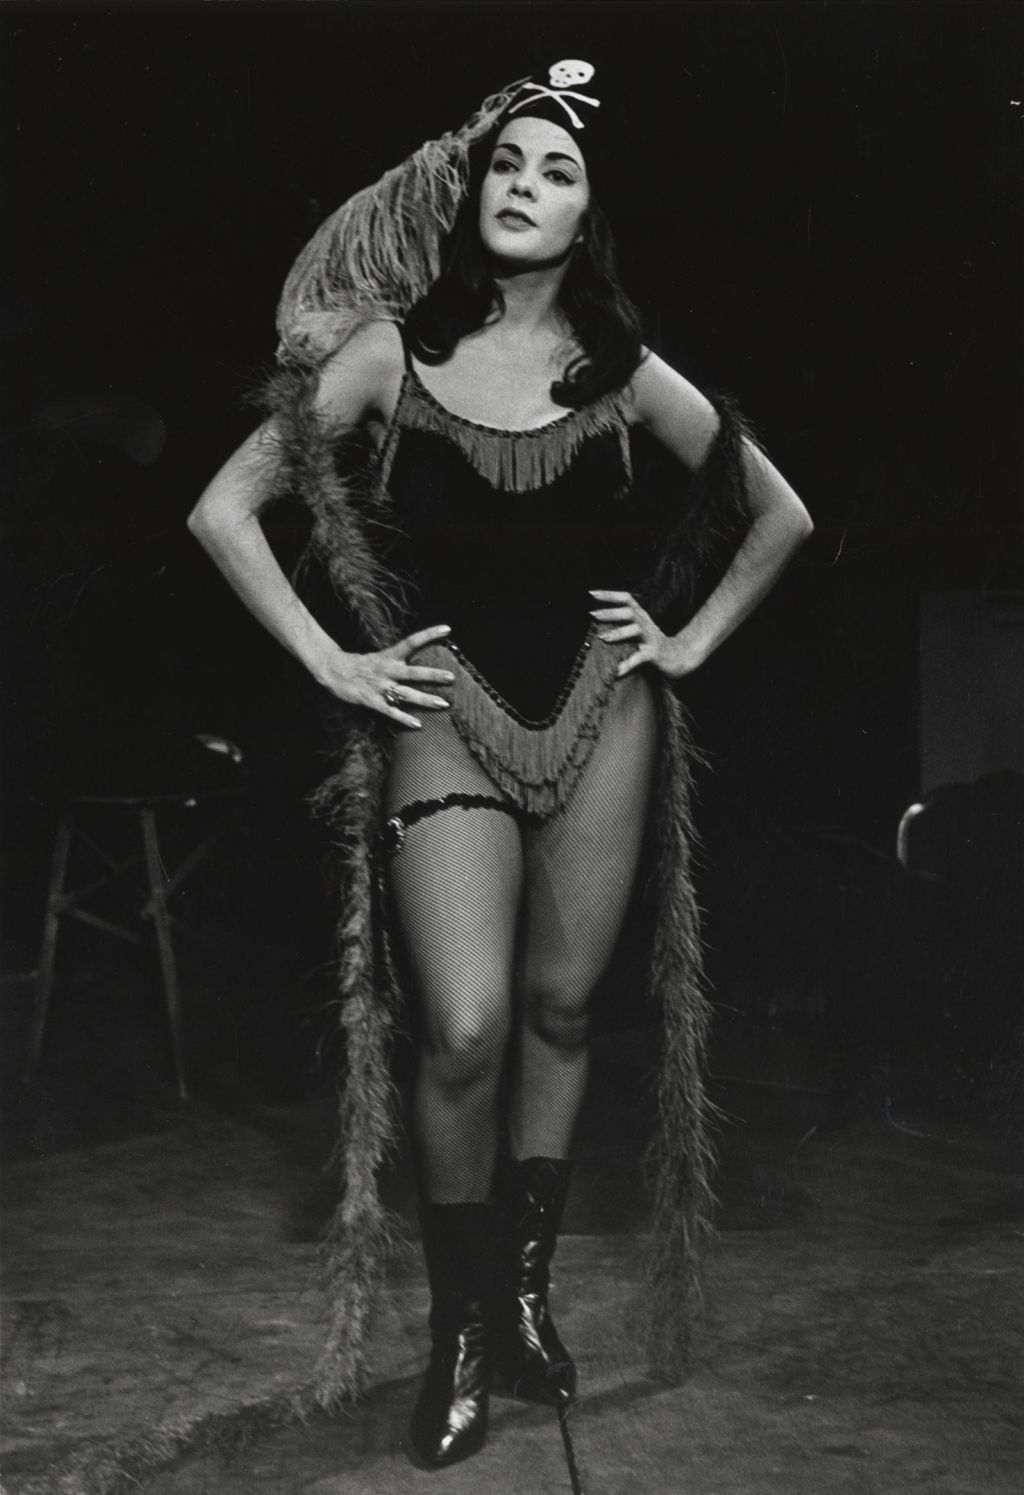 Patricia Kearney on stage in a production of "The Threepenny Opera" at Hull-House Theater